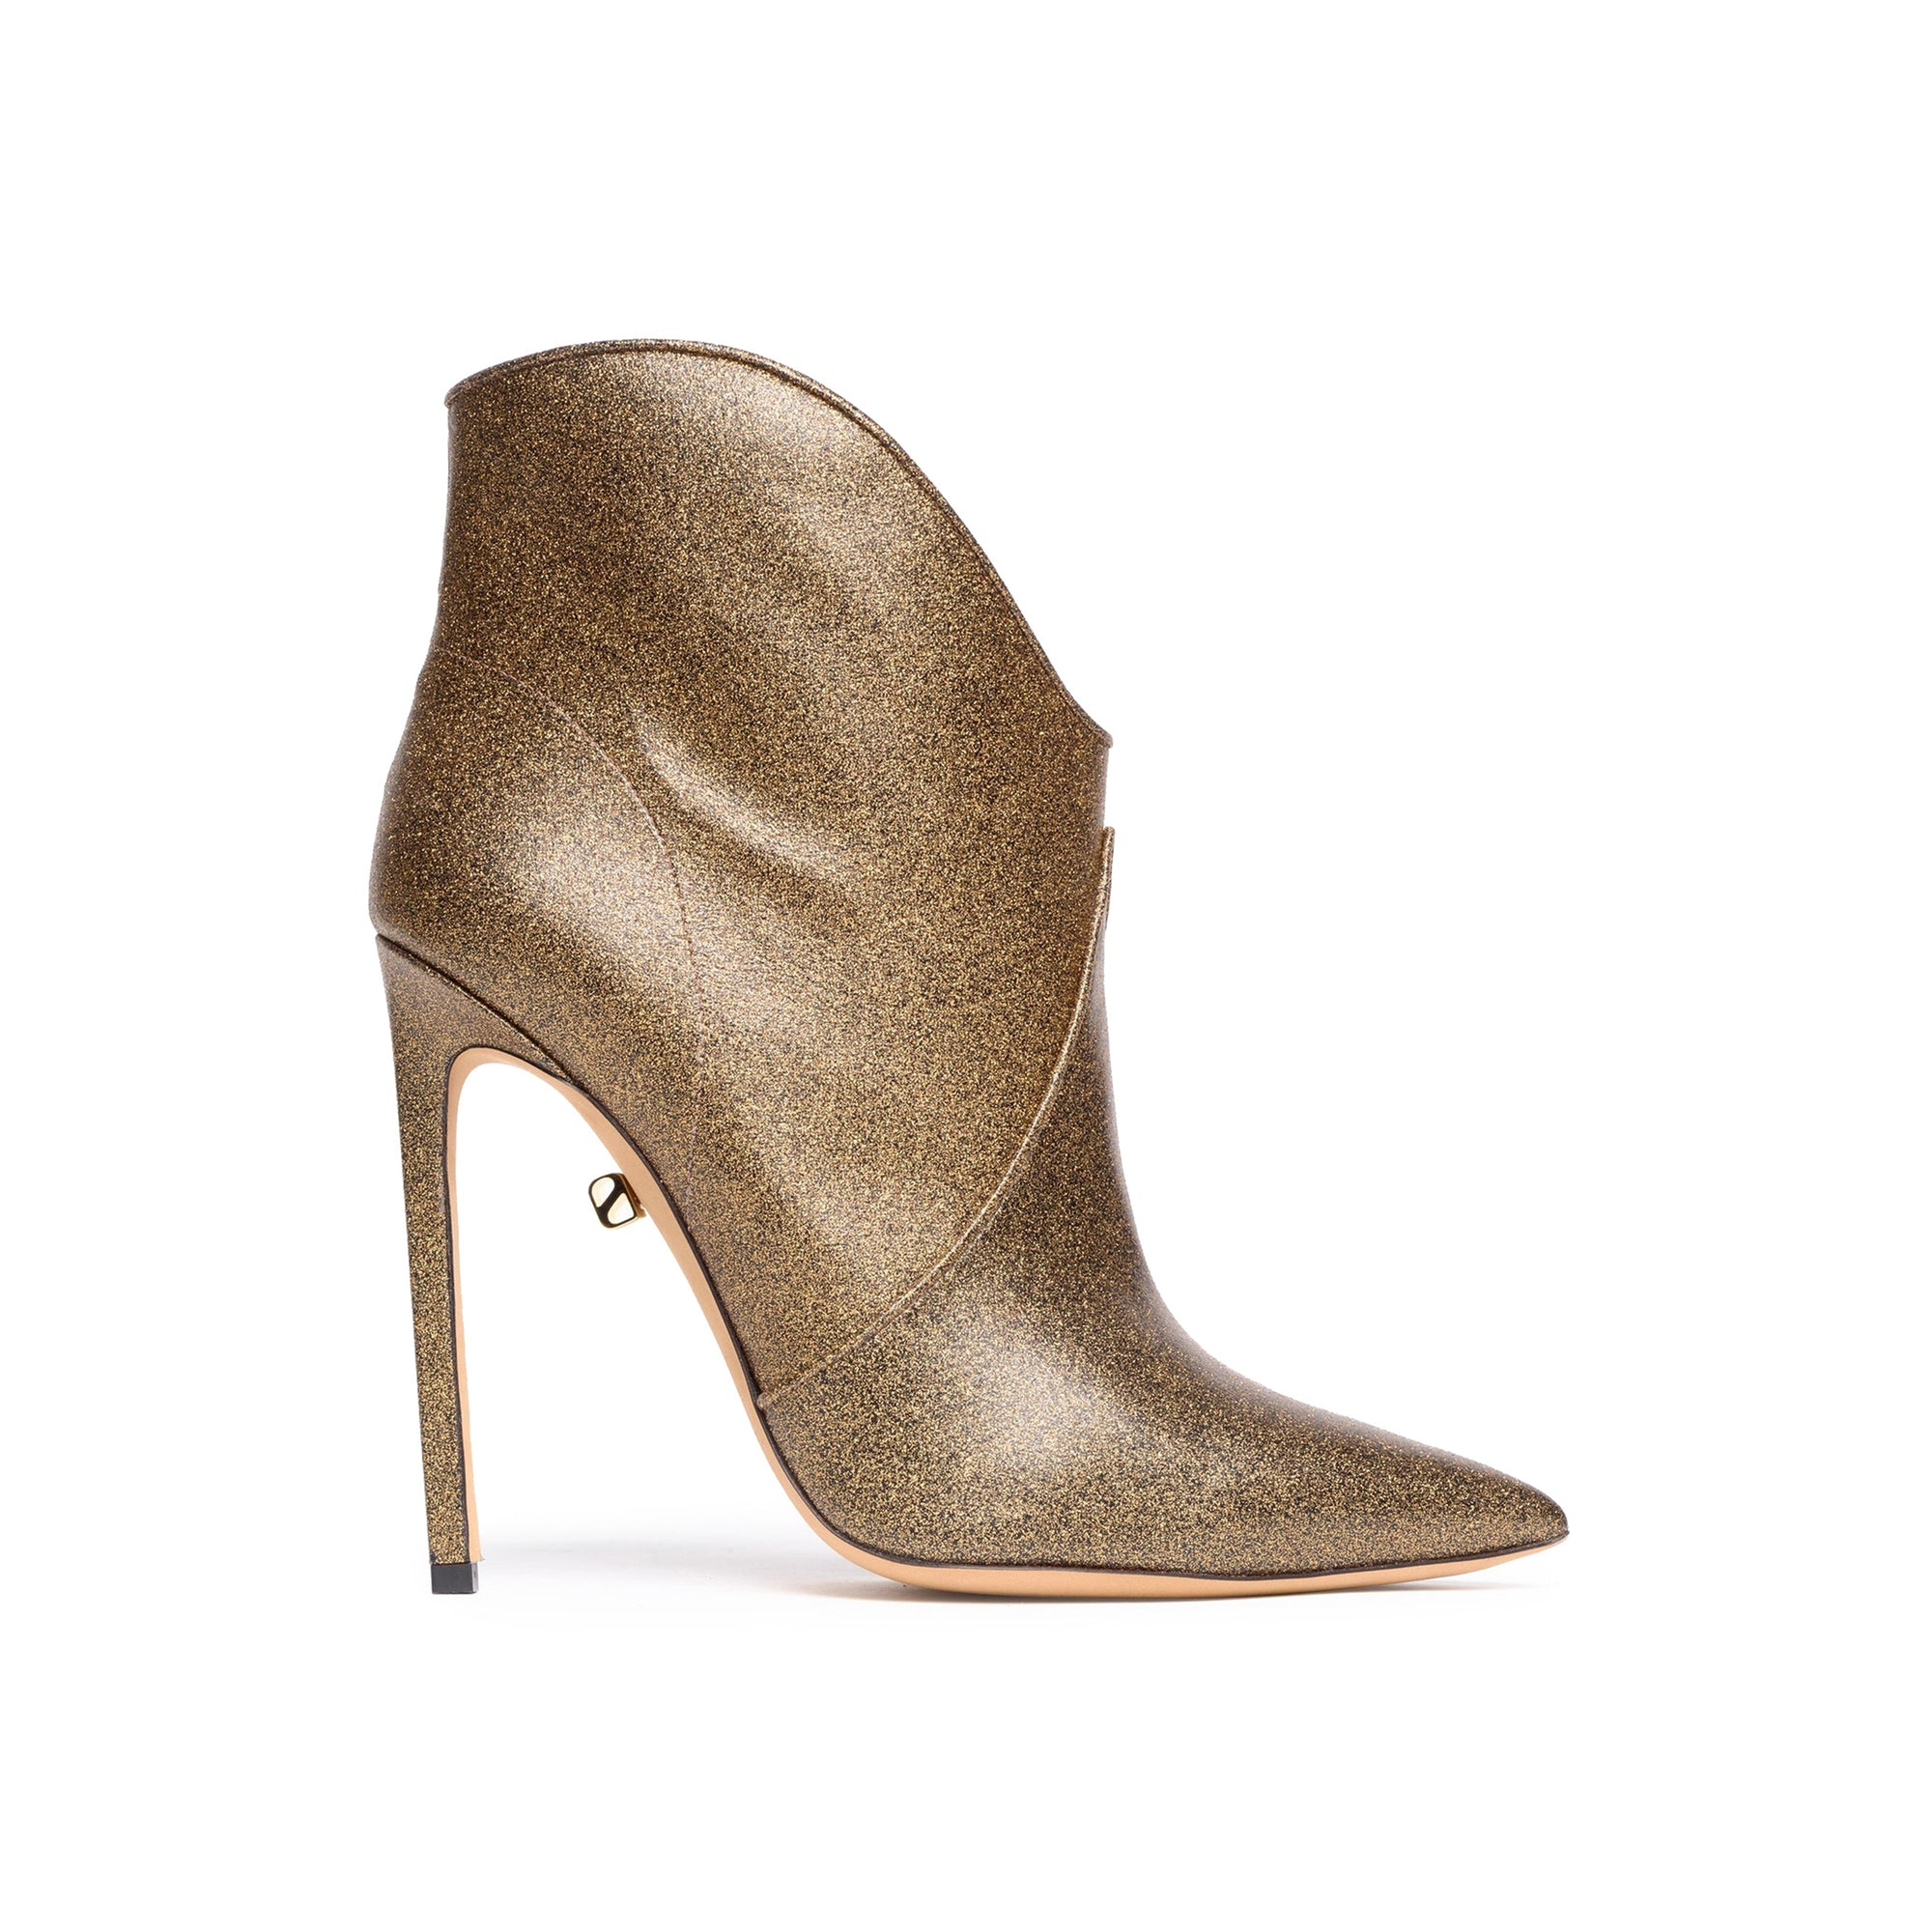 Astrid 120 leather heeled boots - Dark Gold